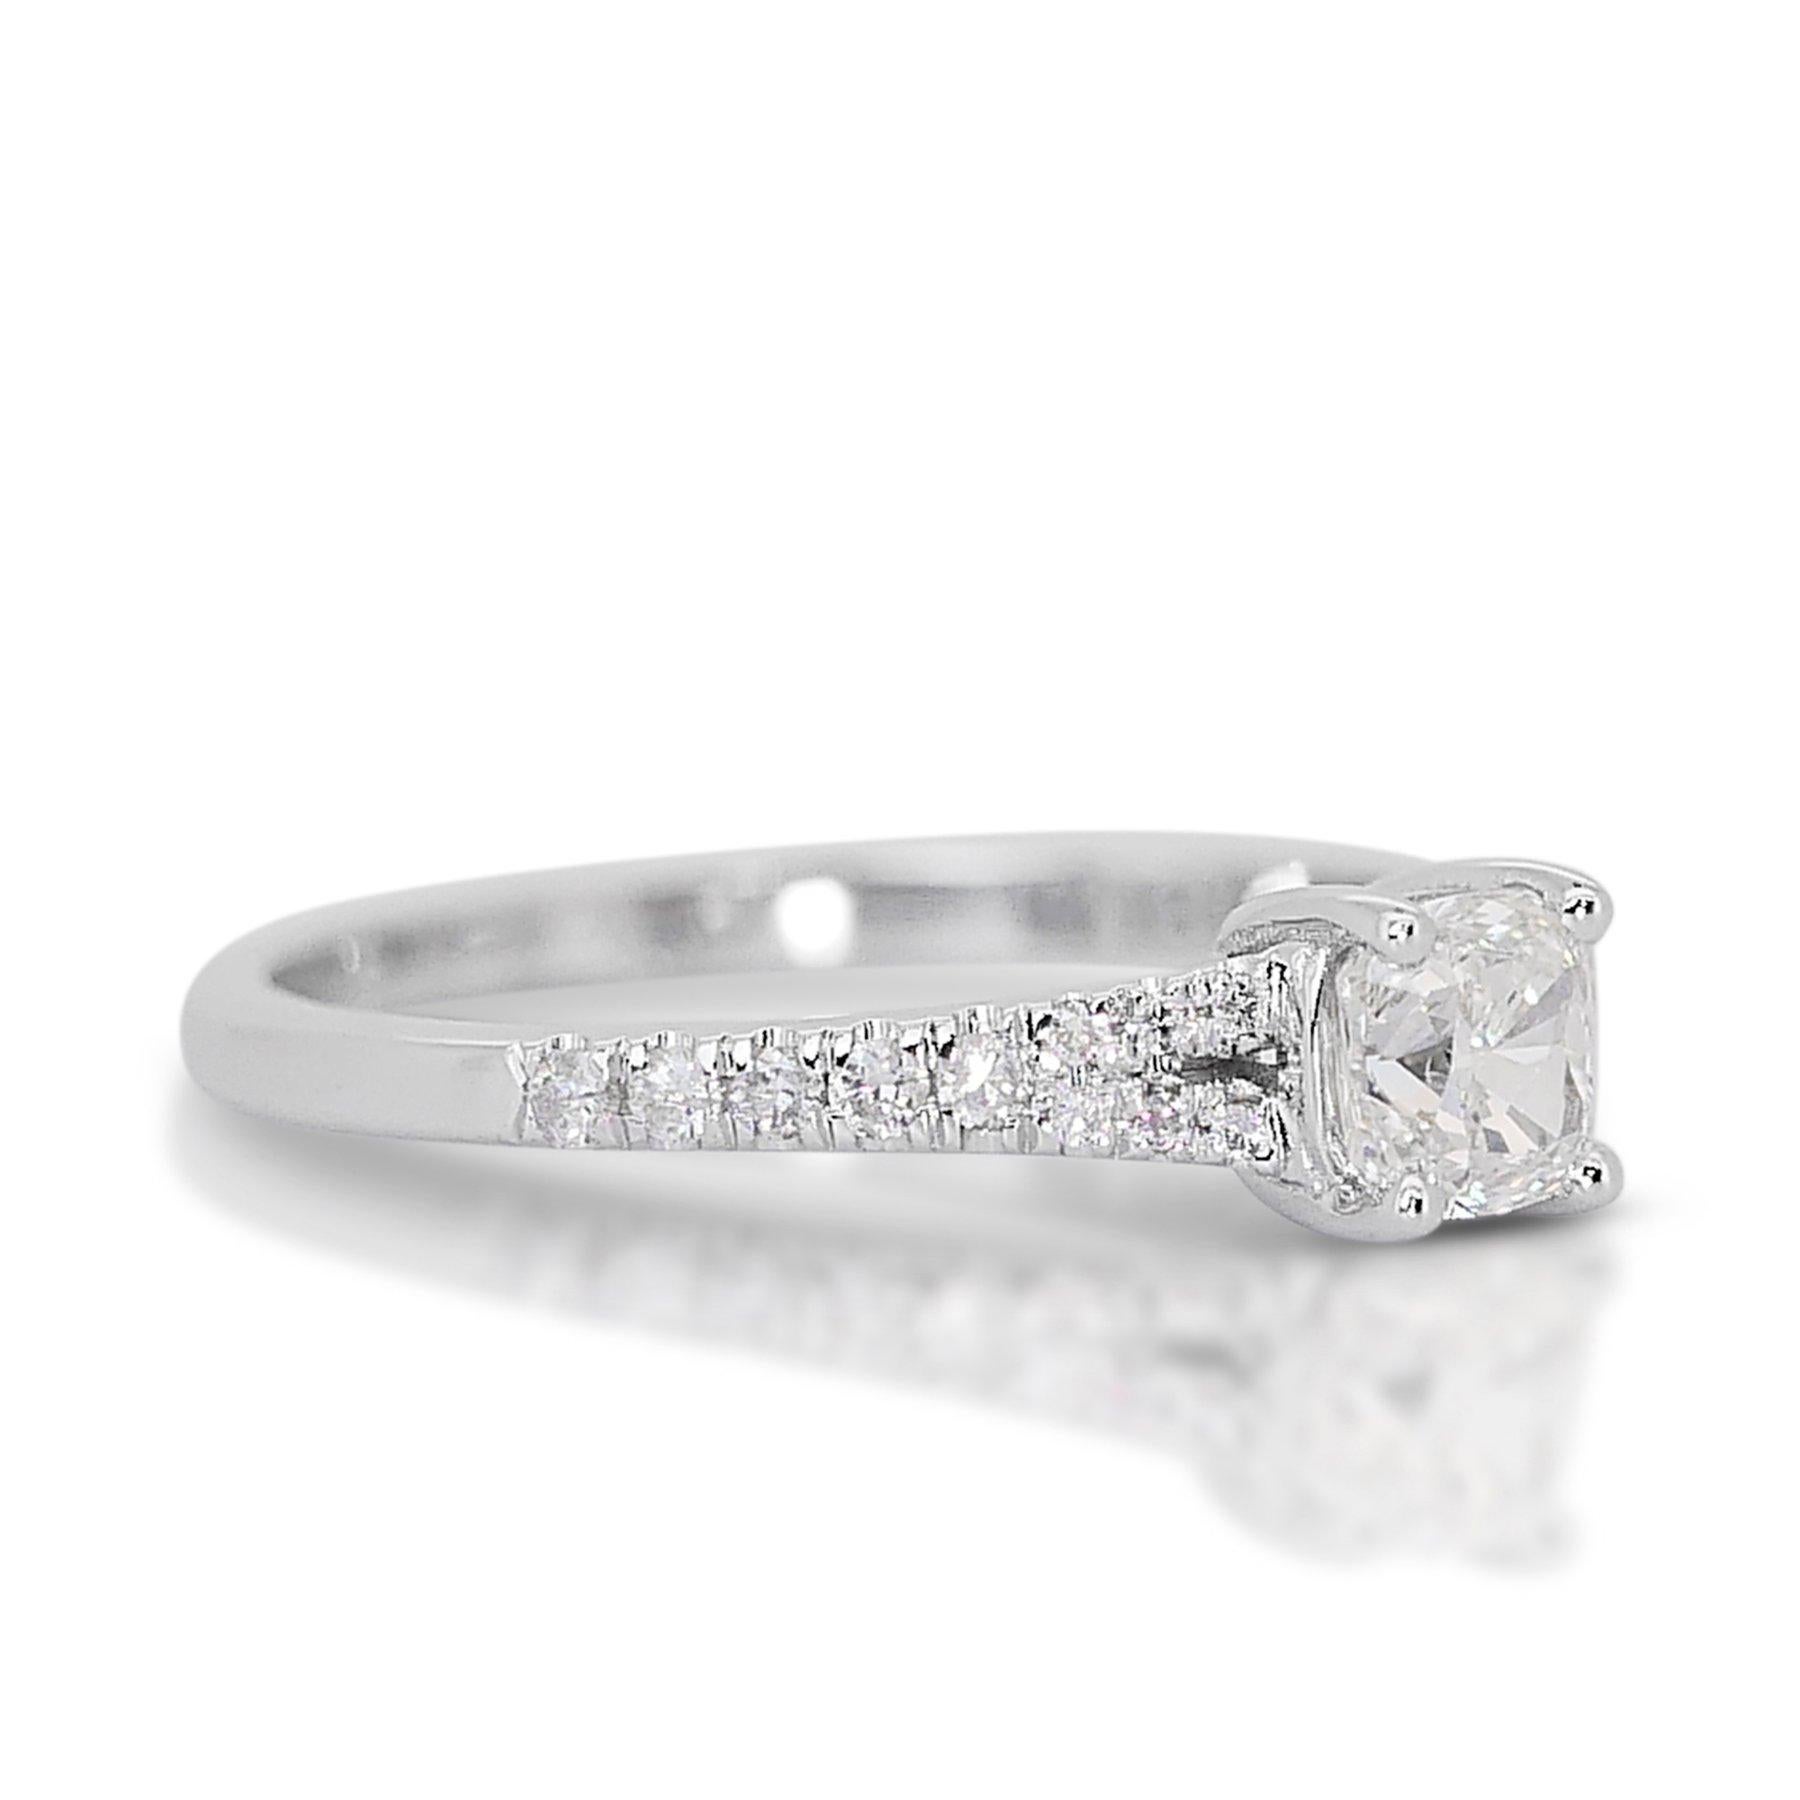 Mesmerizing 1.17ct Diamond Pave Ring in 18k White Gold - GIA Certified

Experience elegance with this exquisite diamond ring crafted from 18k white gold. The main stone is a 1.00-carat cushion-cut diamond, with a color grade that exudes a gentle